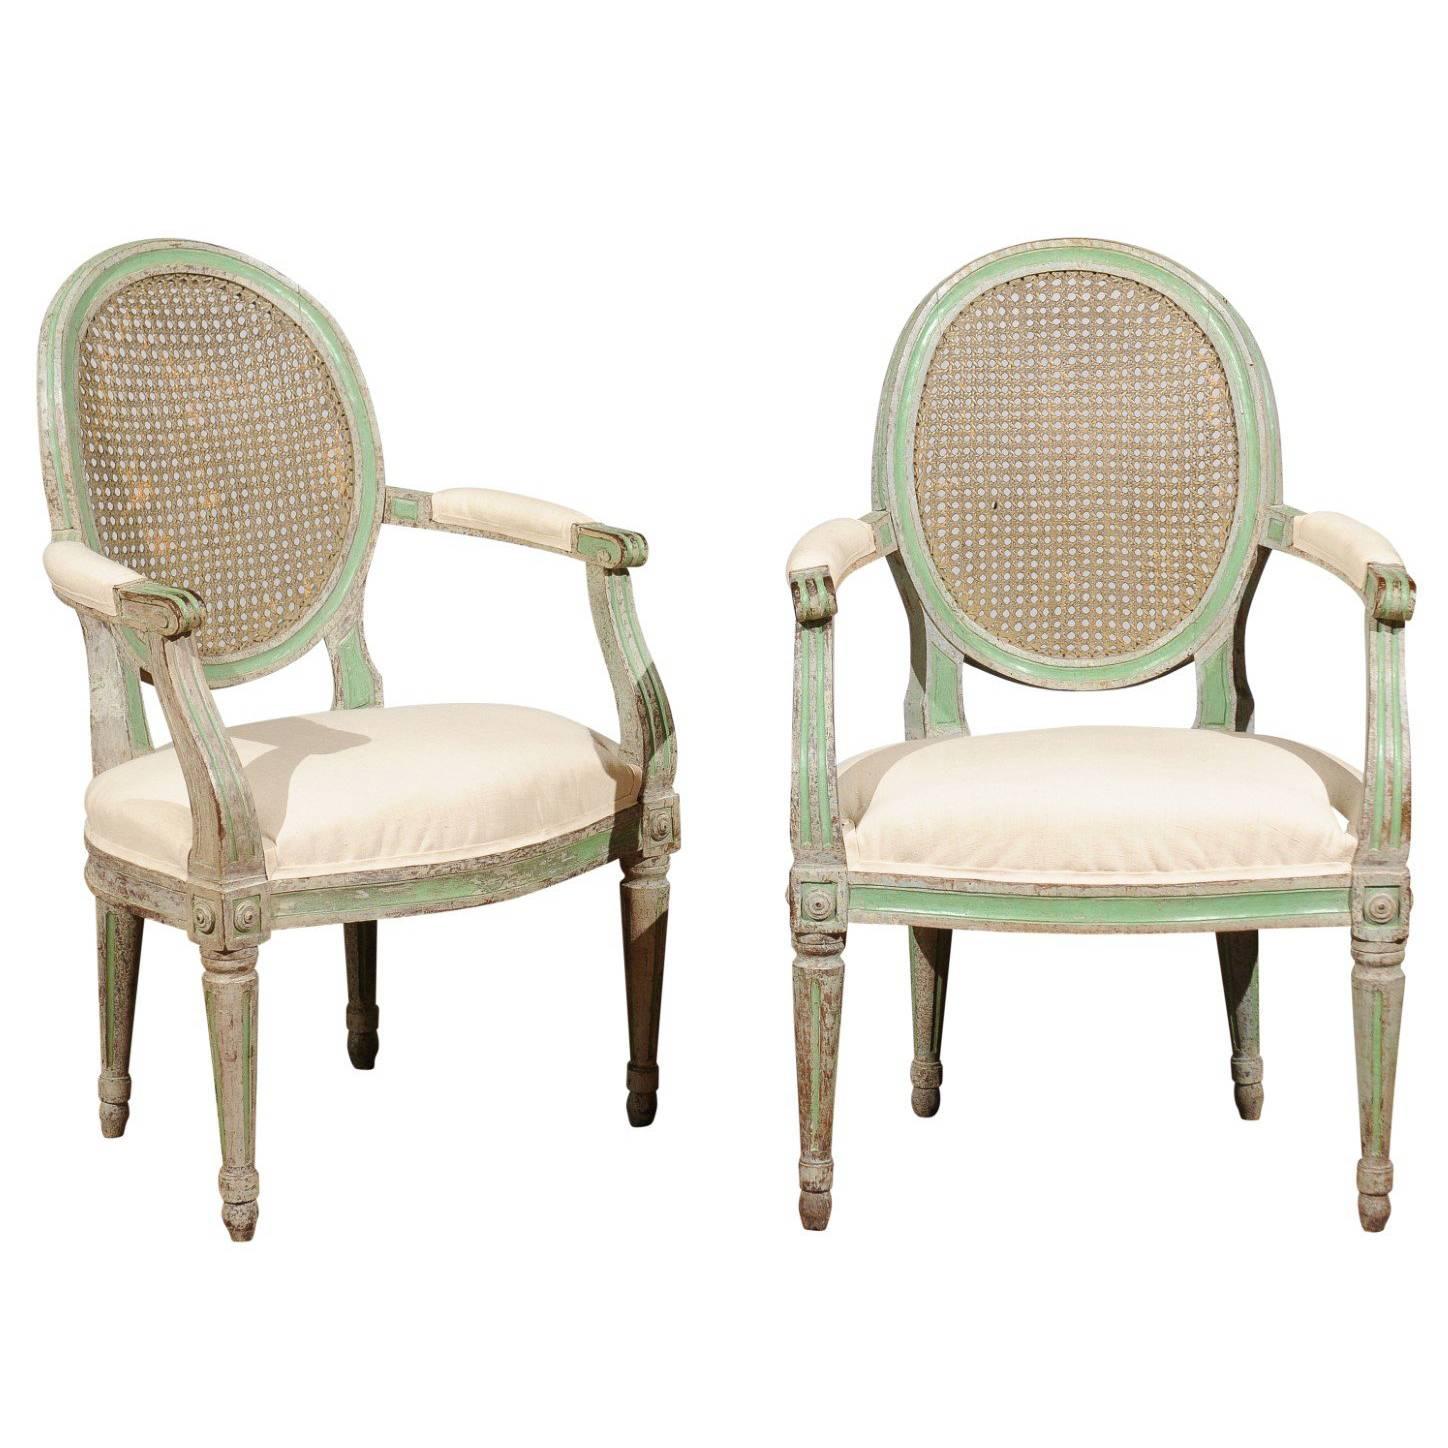 Pair of Italian Neoclassical 1850s Green Painted Armchairs with Cane Oval Backs